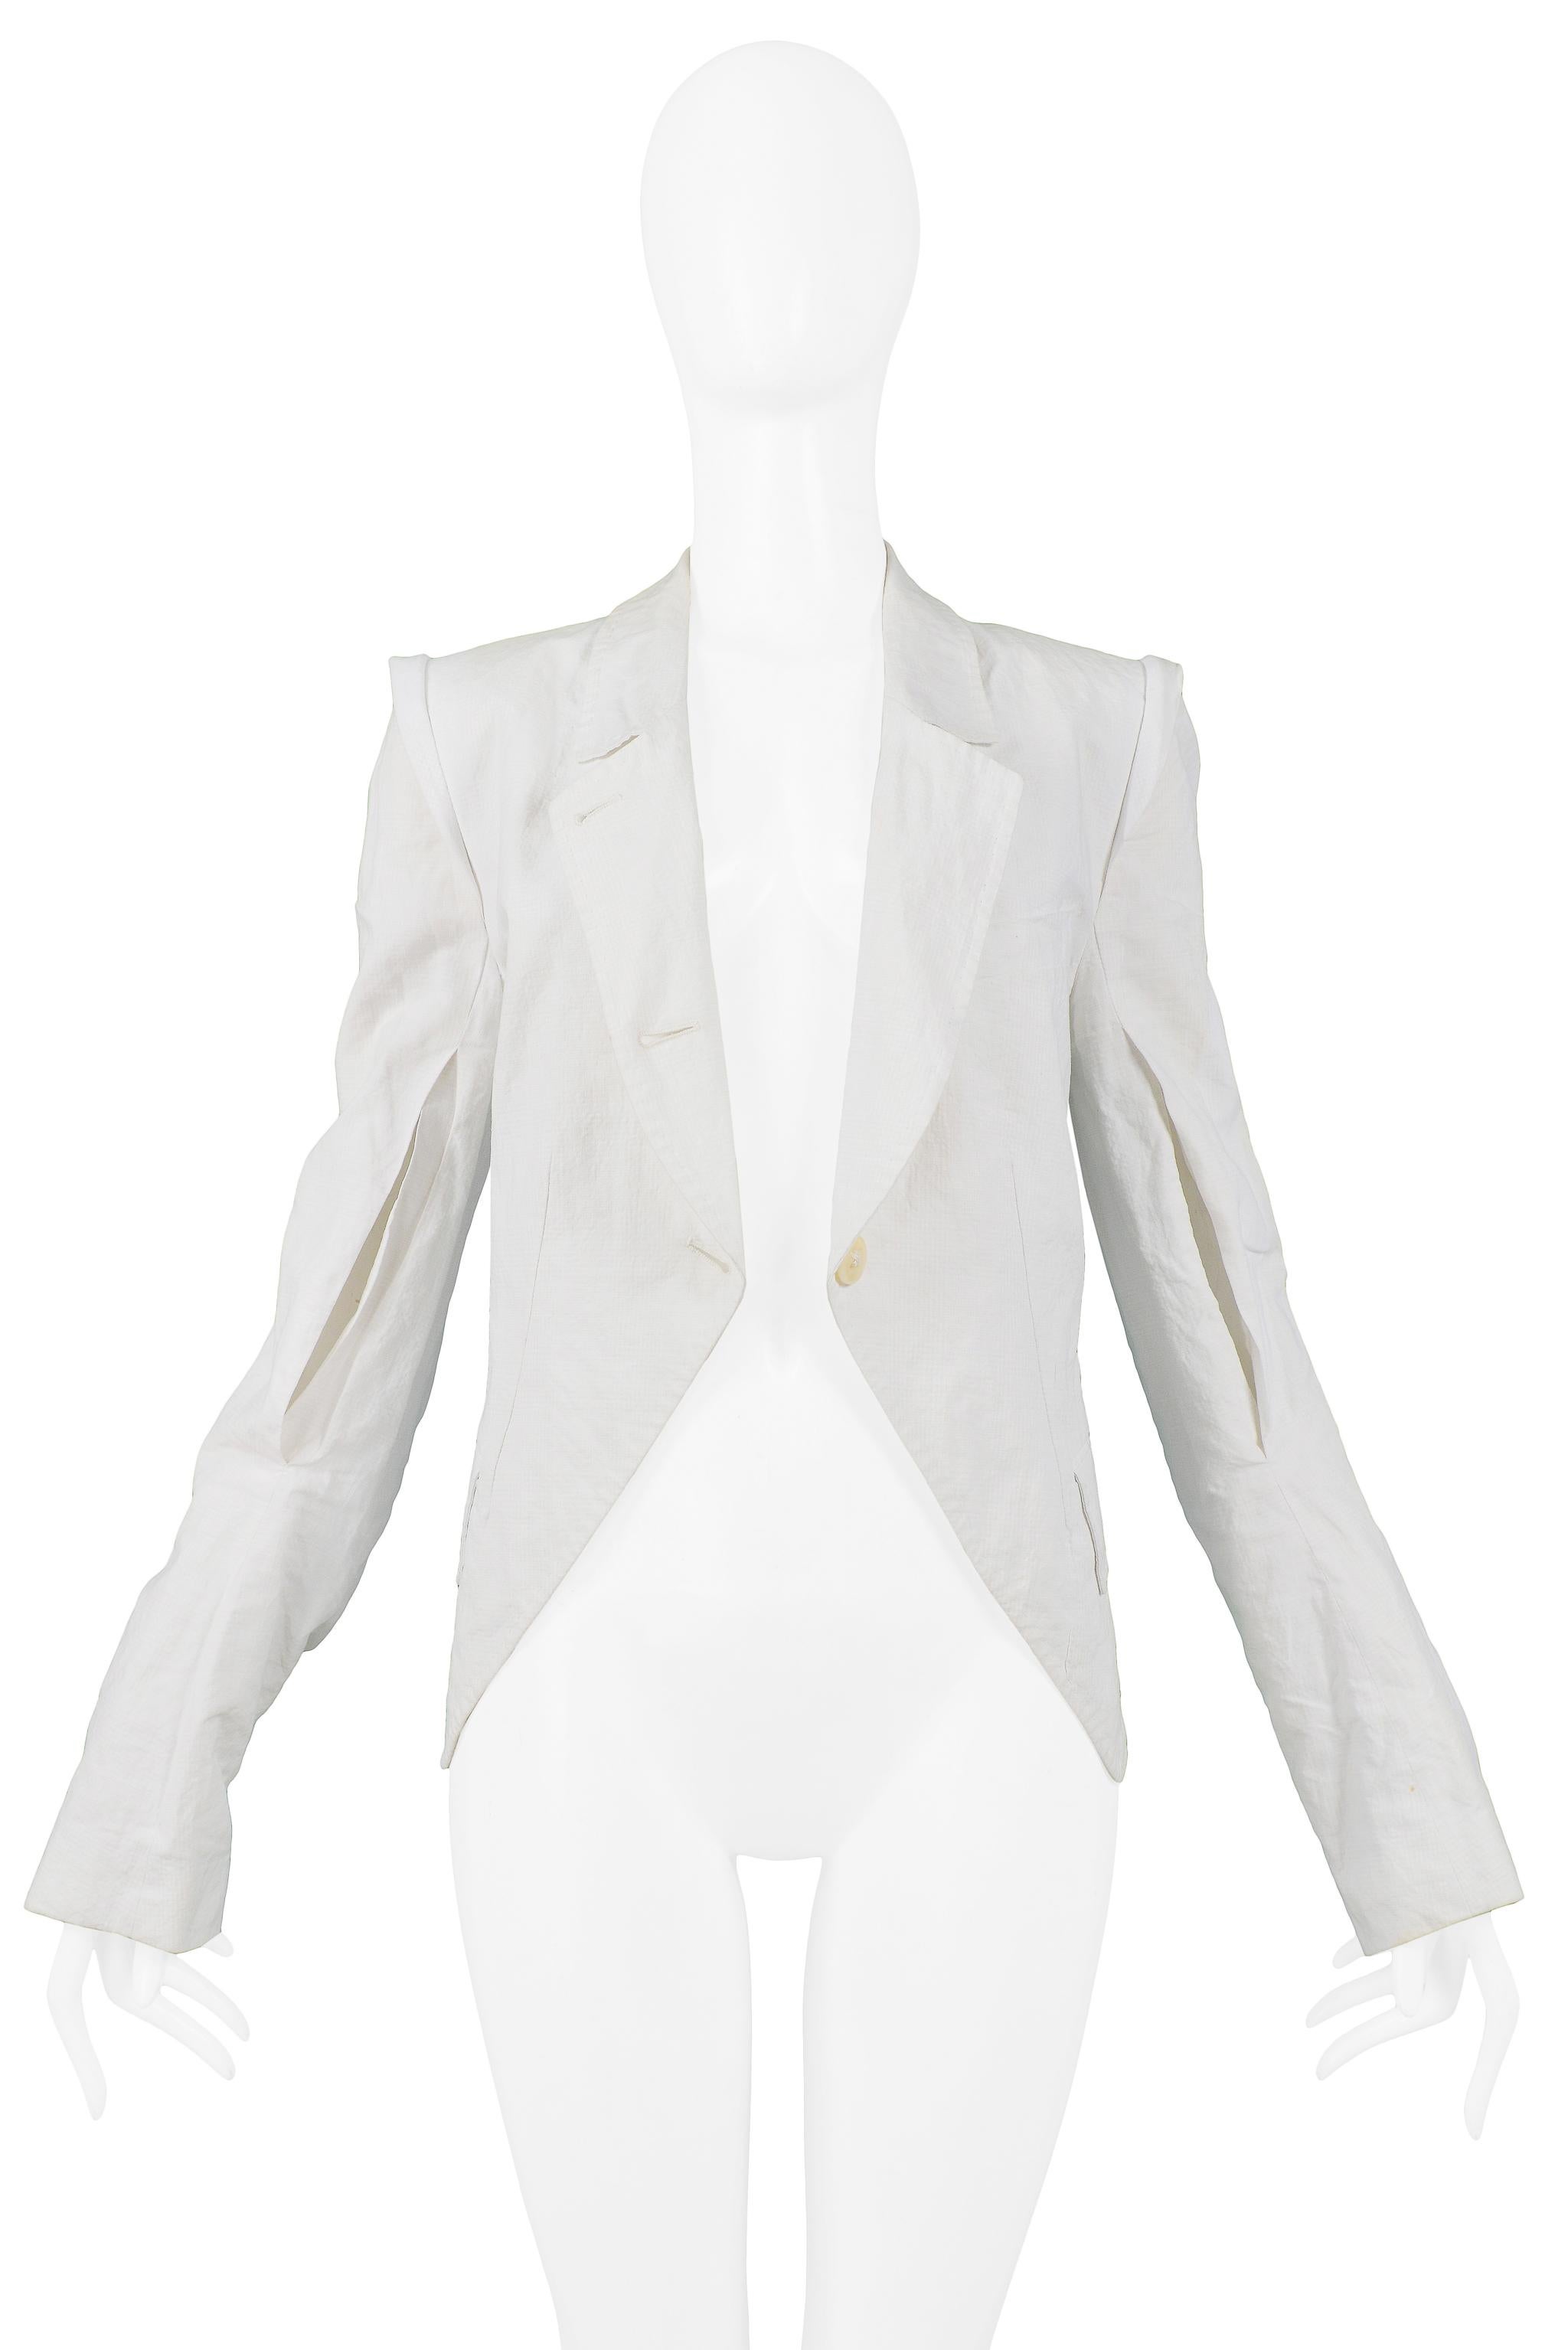 Resurrection Vintage is excited to offer a vintage Ann Demeulemeester white cotton blazer jacket featuring slit sleeve detail, curved asymmetrical 3-button closure, side pockets, button cuffs, and fold-over collar.

Ann Demeulemeester
Size